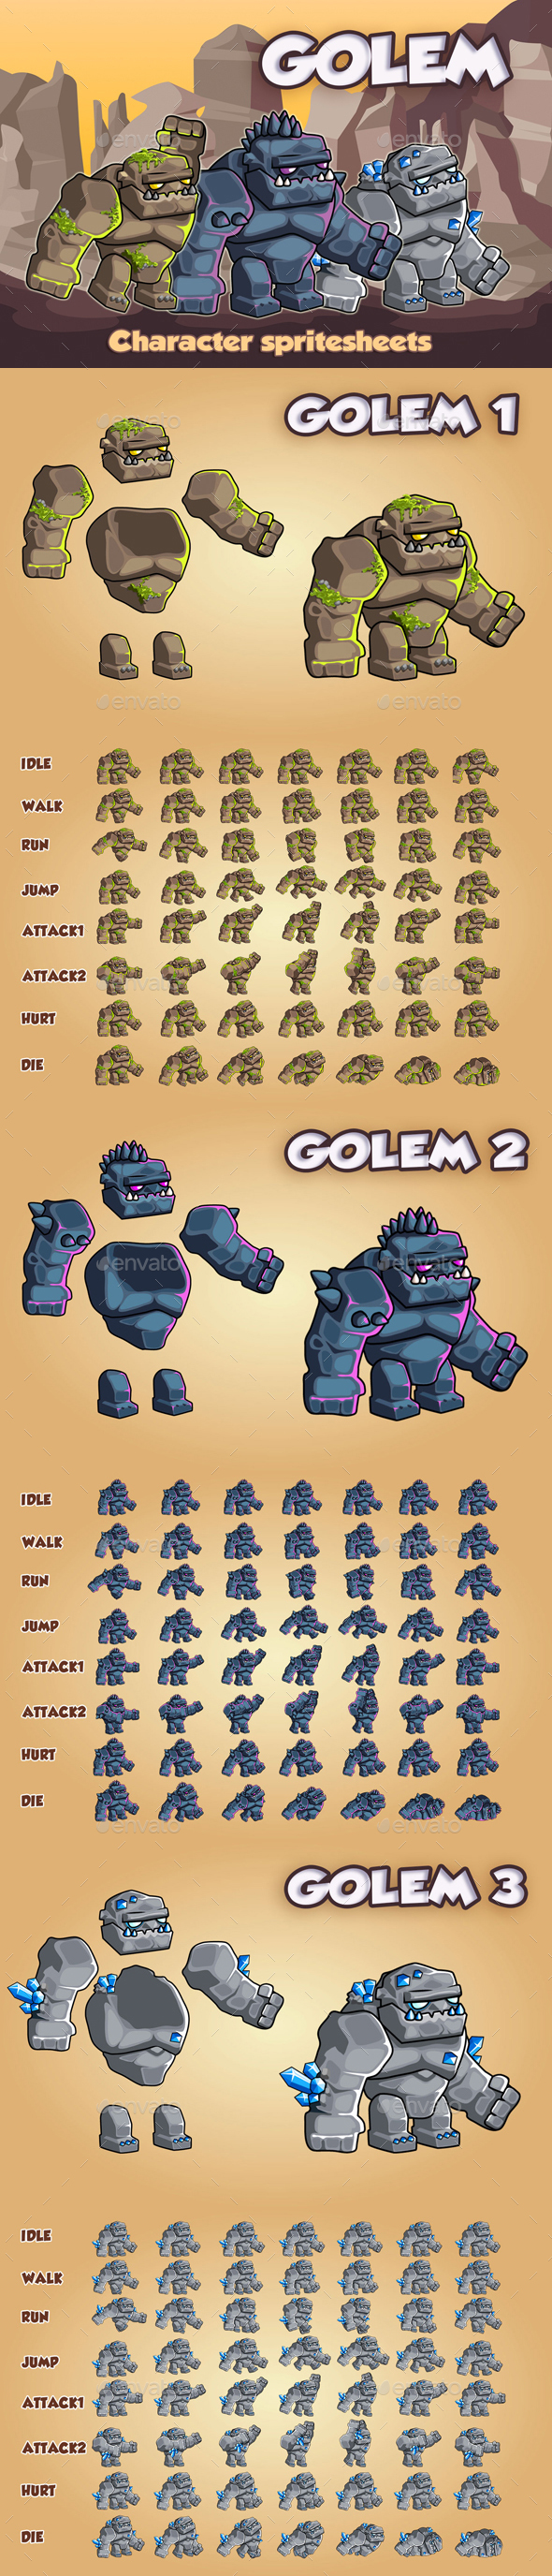 Golems 2D Game Character Sprite Sheet by craftpix_net | GraphicRiver